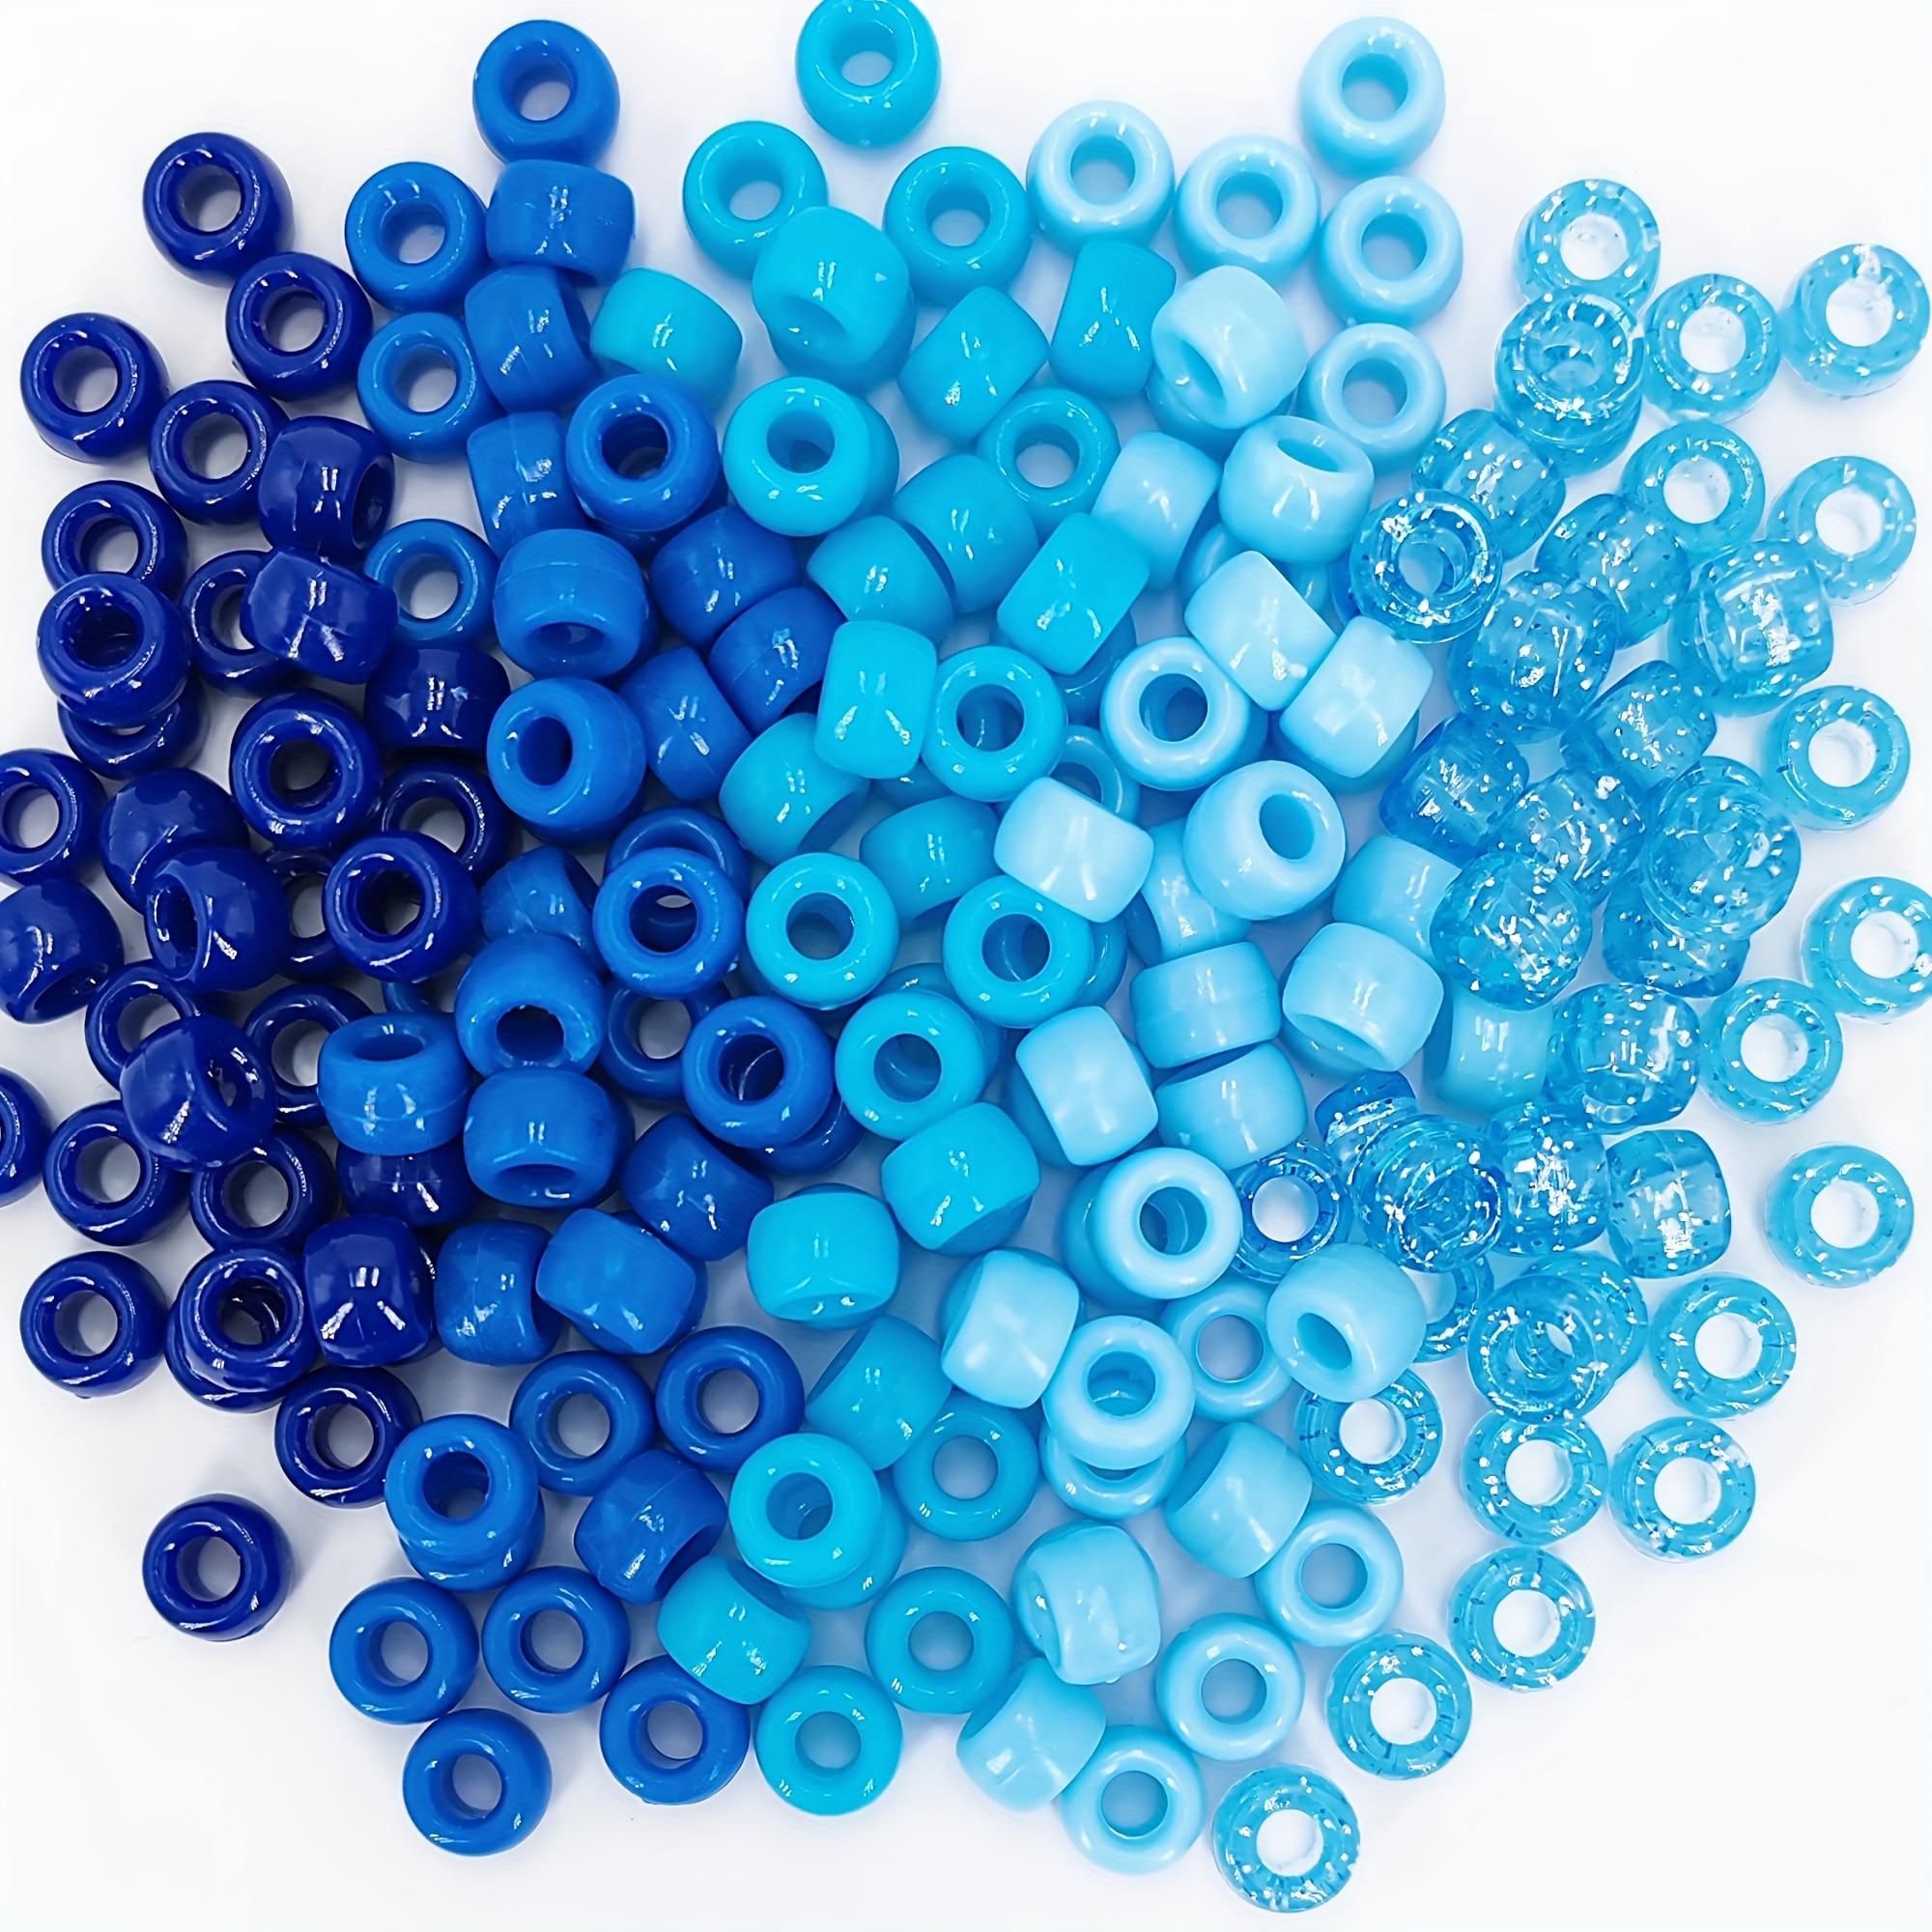 

500/1000pcs 6x9mm Beads Bulk, 5 Styles Blue Beads For Bracelets Making Kit, , Hair Beads For Braids, Craft Beads For Jewelry Making